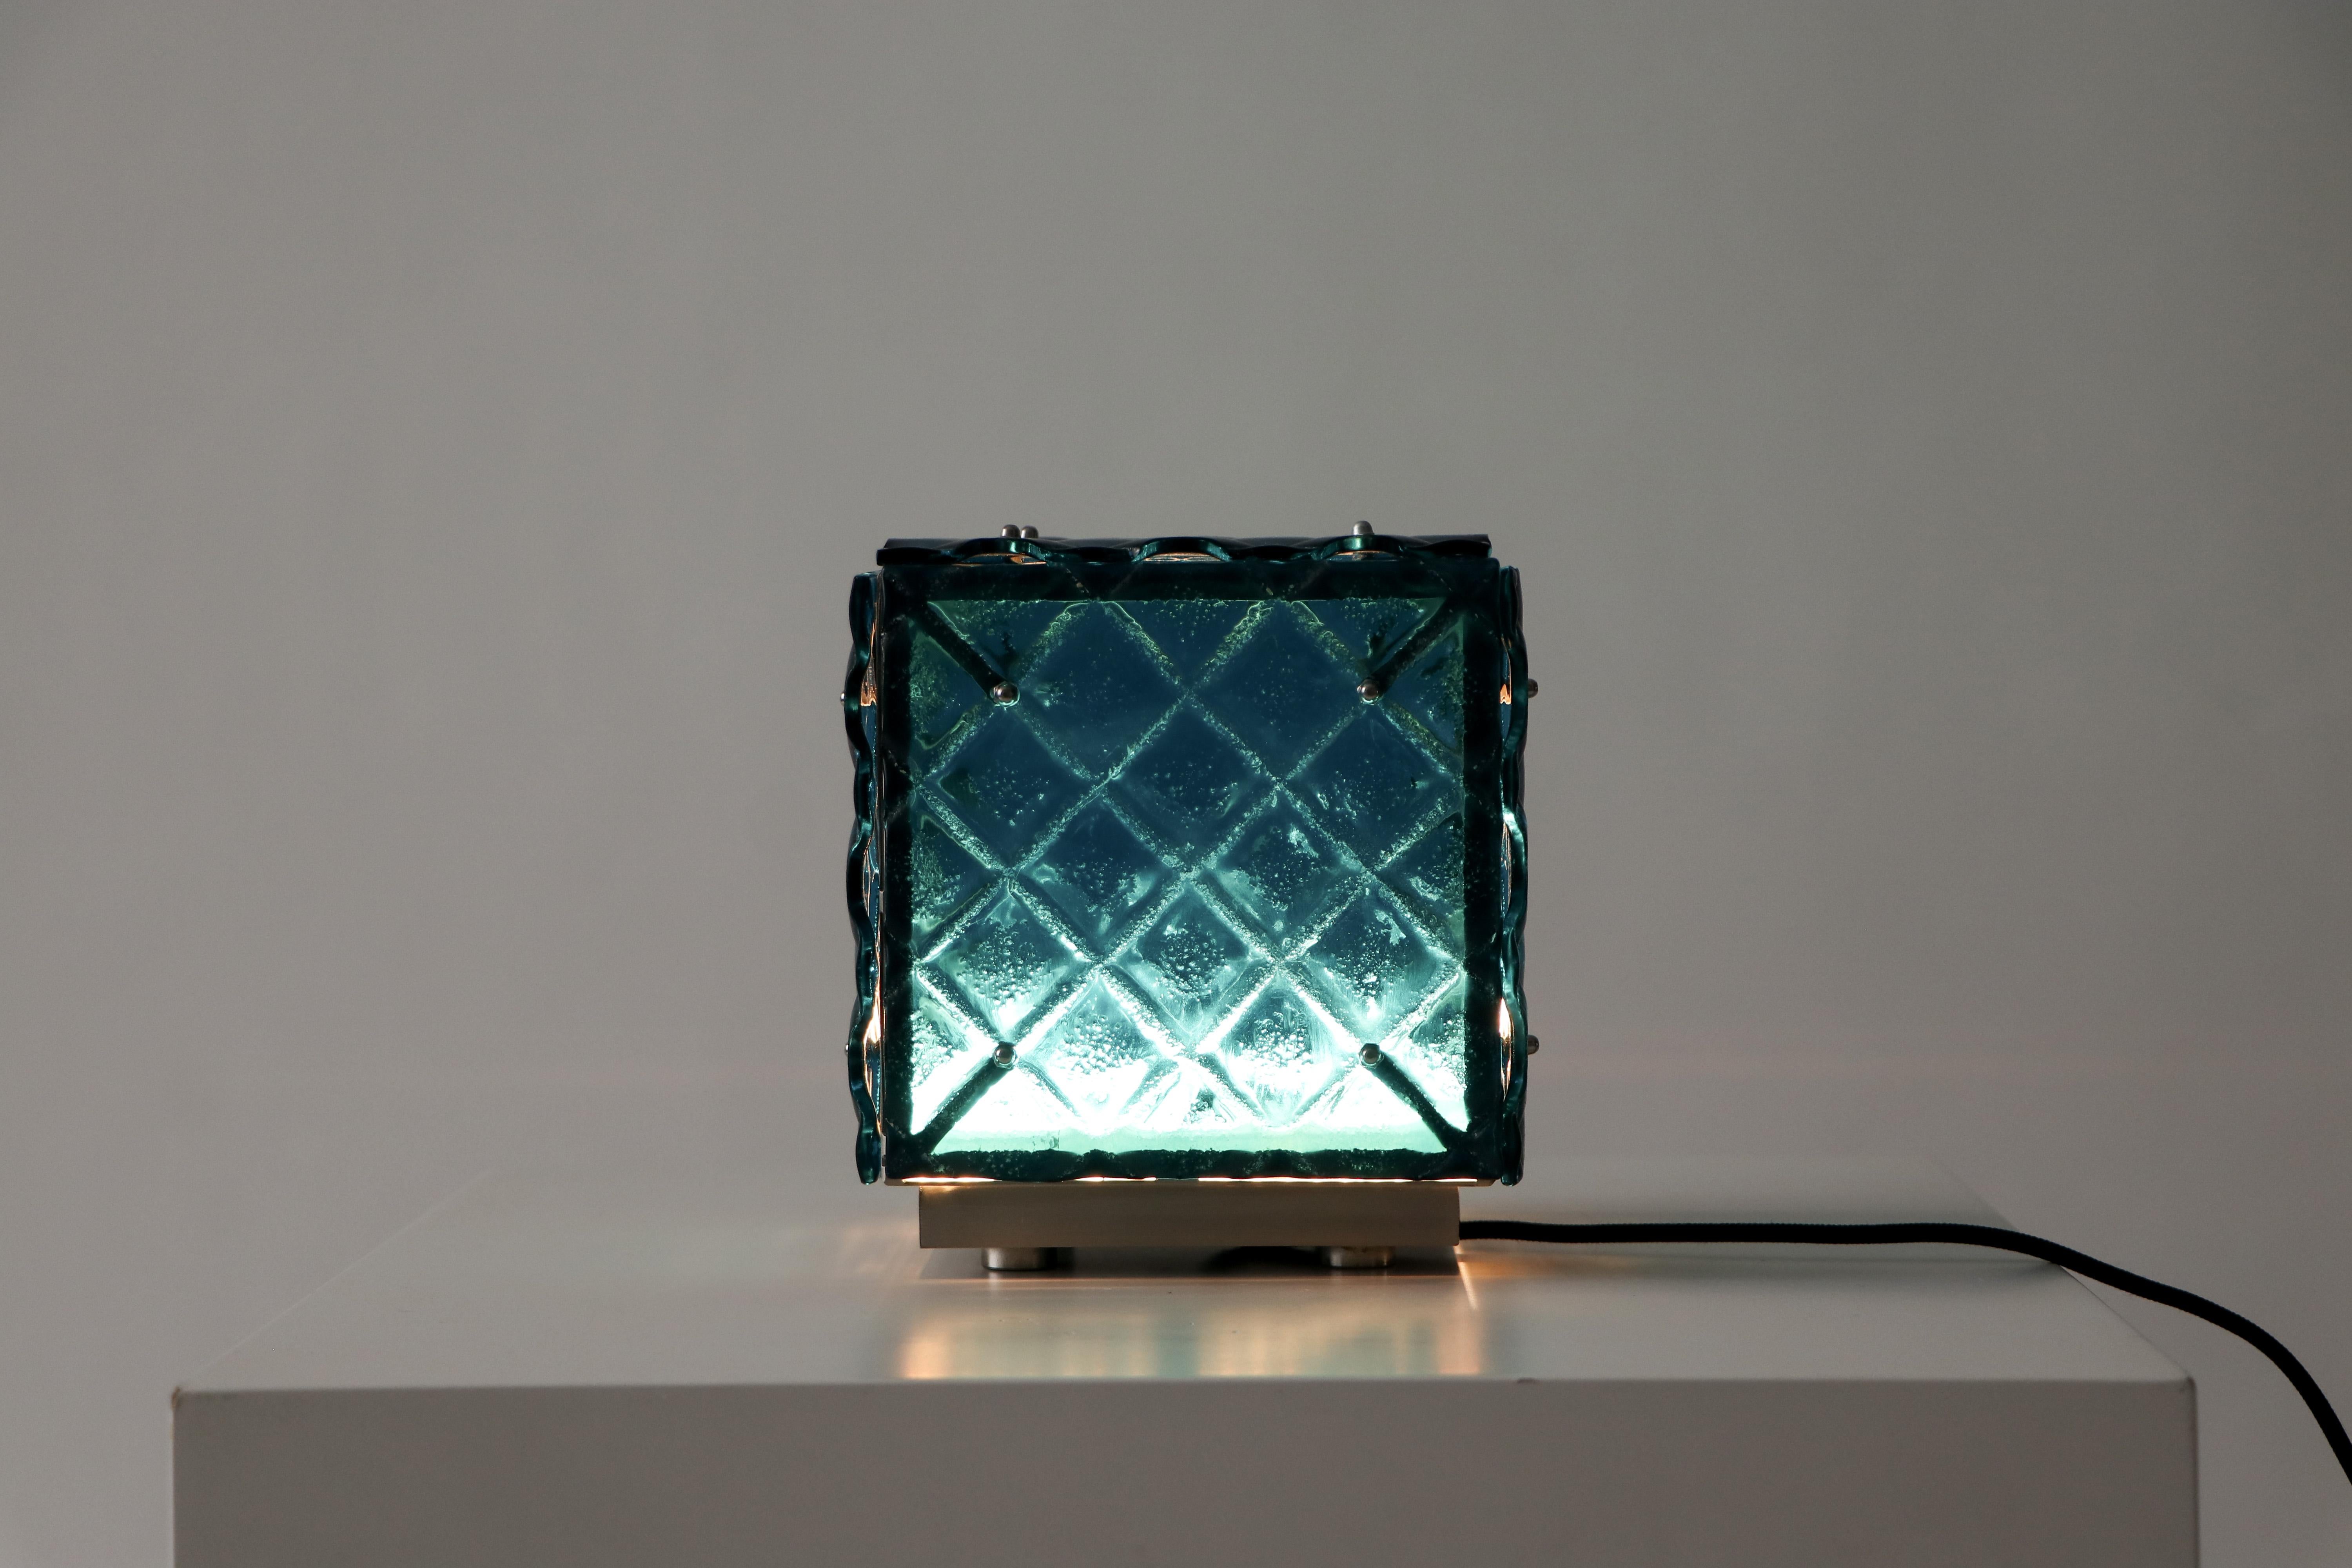 Spanish Contemporary Functional Art Ambient Blue Coloured Light Artisanal Fused Glass For Sale